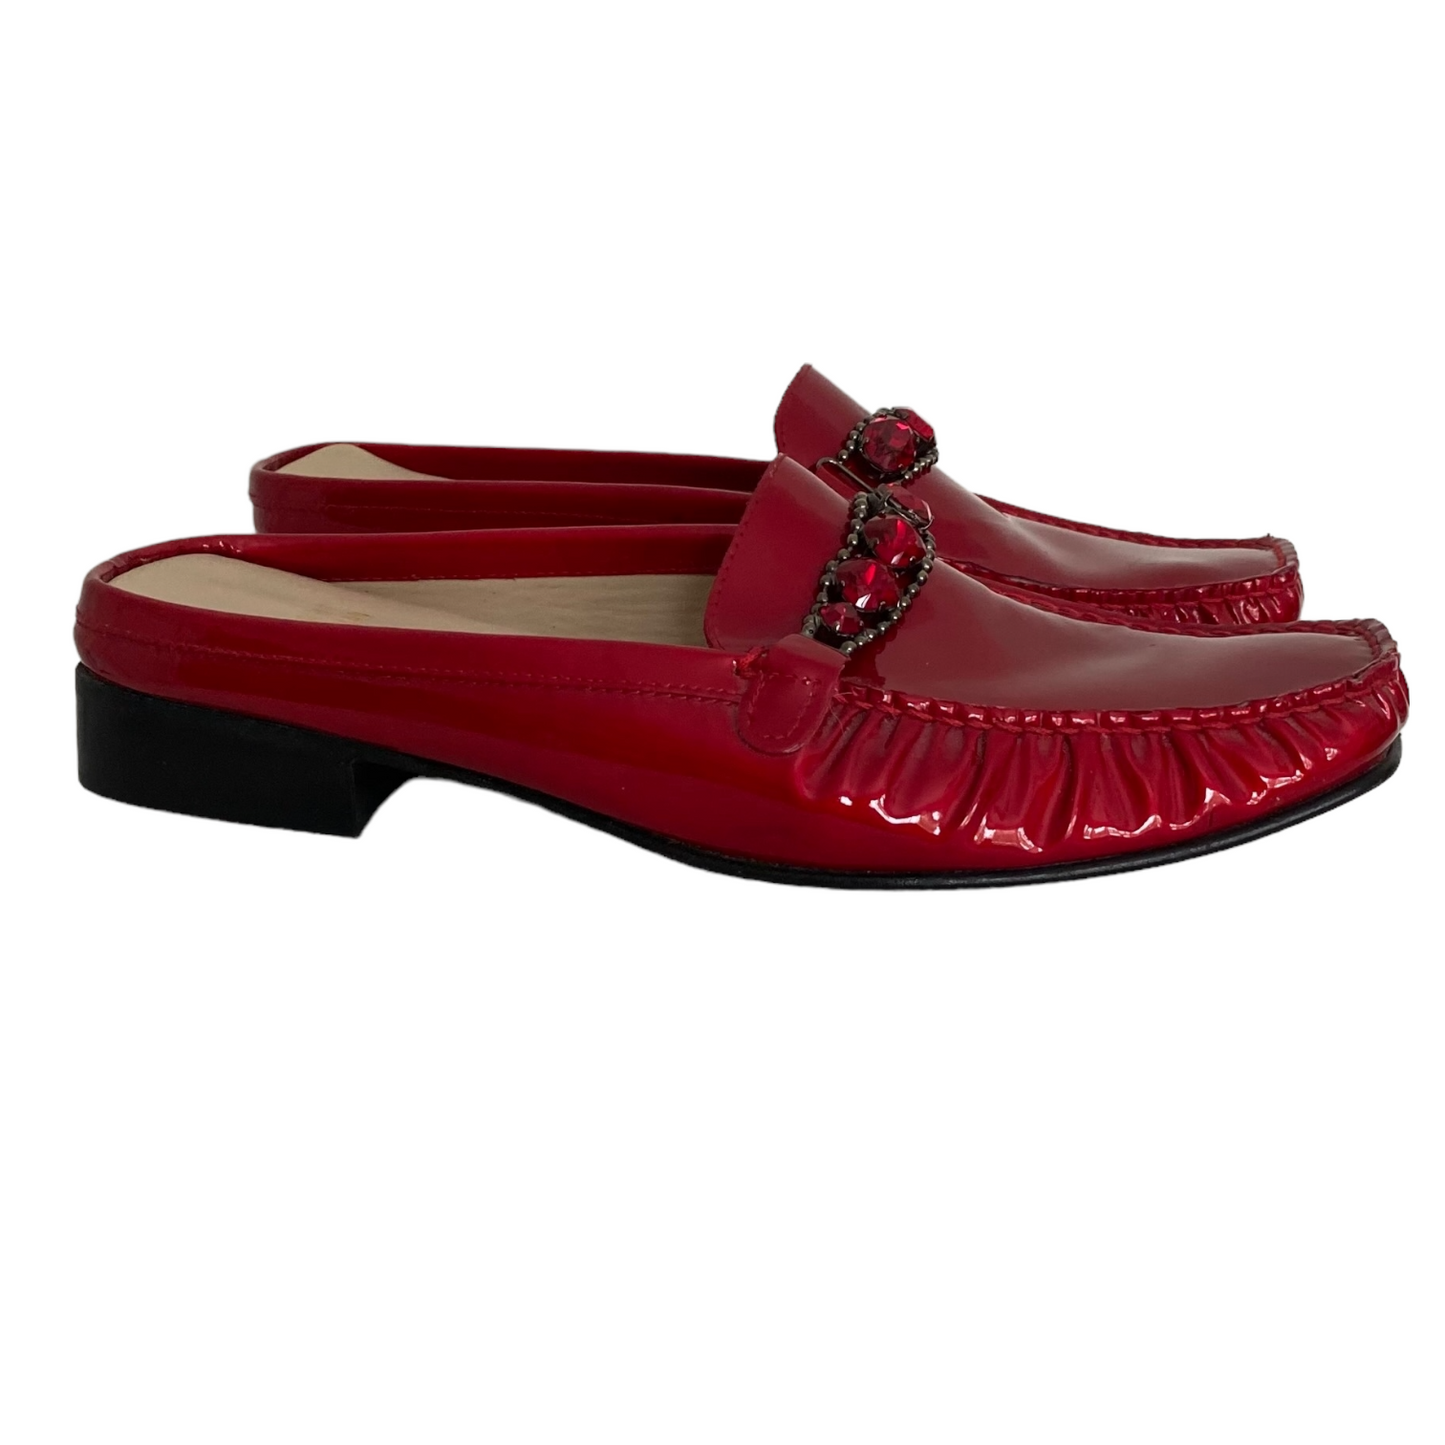 Stuart Weitzman Red Patent Leather Mule Shoes